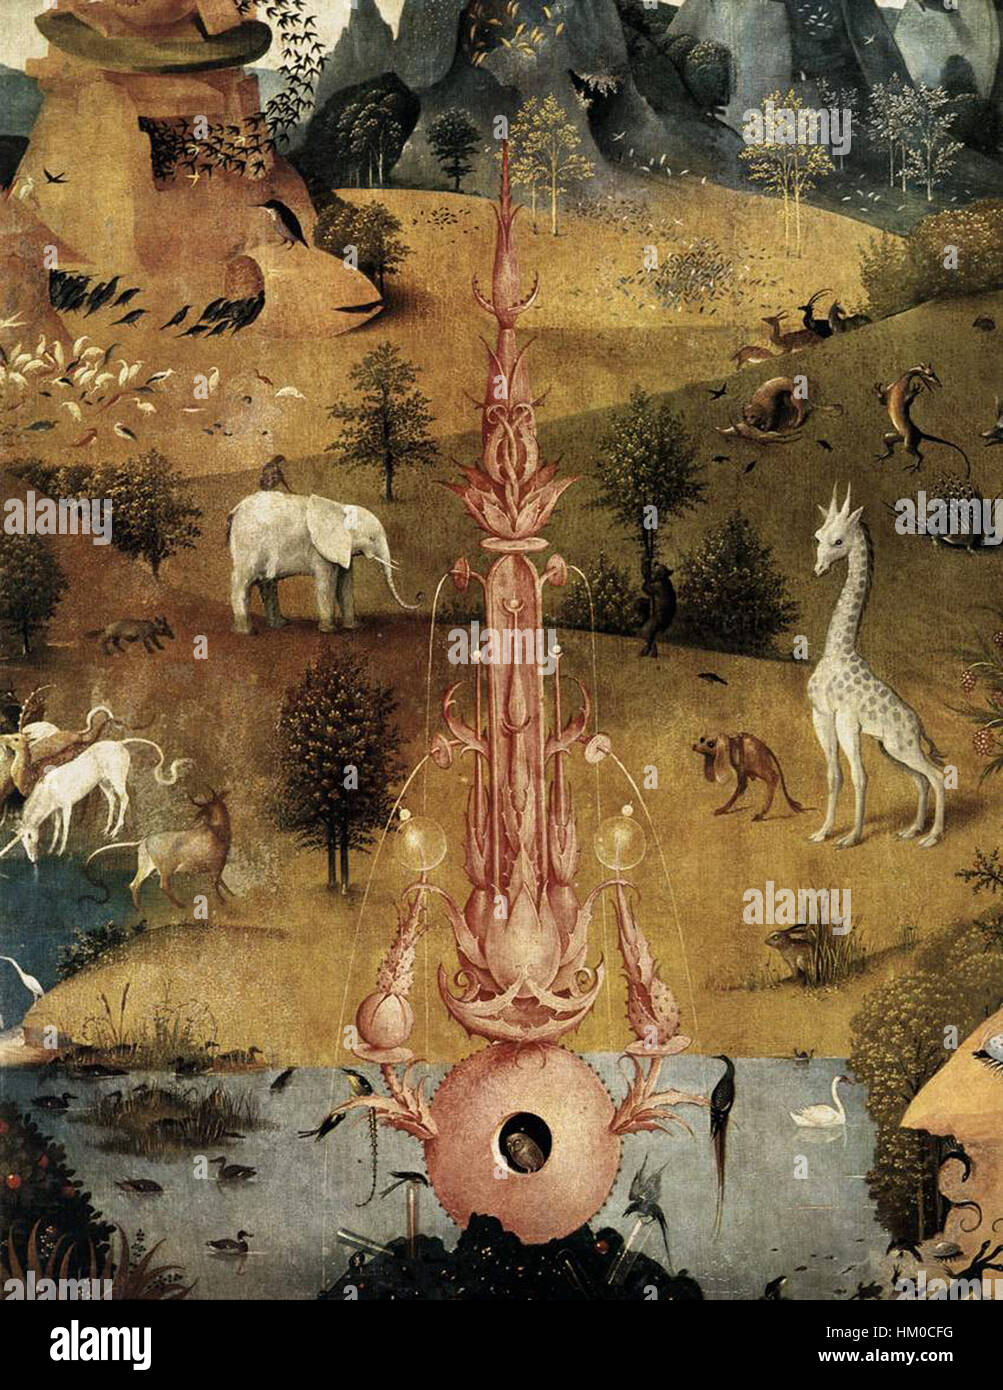 Hieronymus Bosch Triptych Of Garden Of Earthly Delights Detail